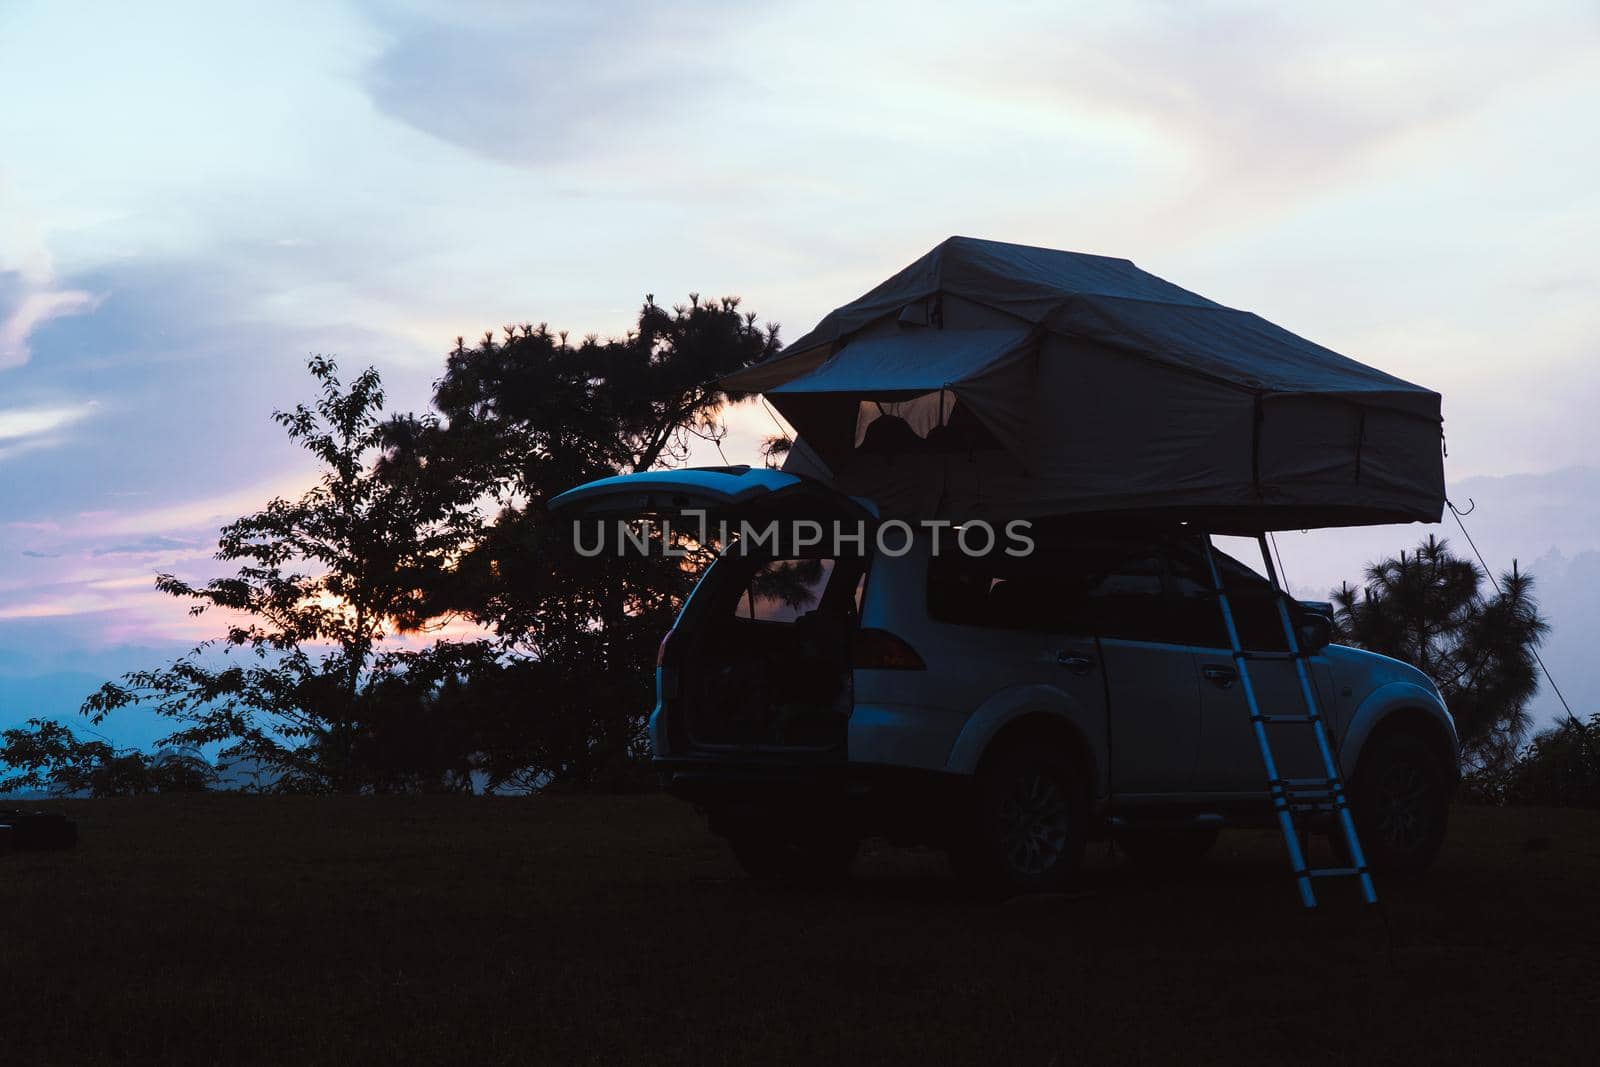 A car with a tent on the roof by somesense